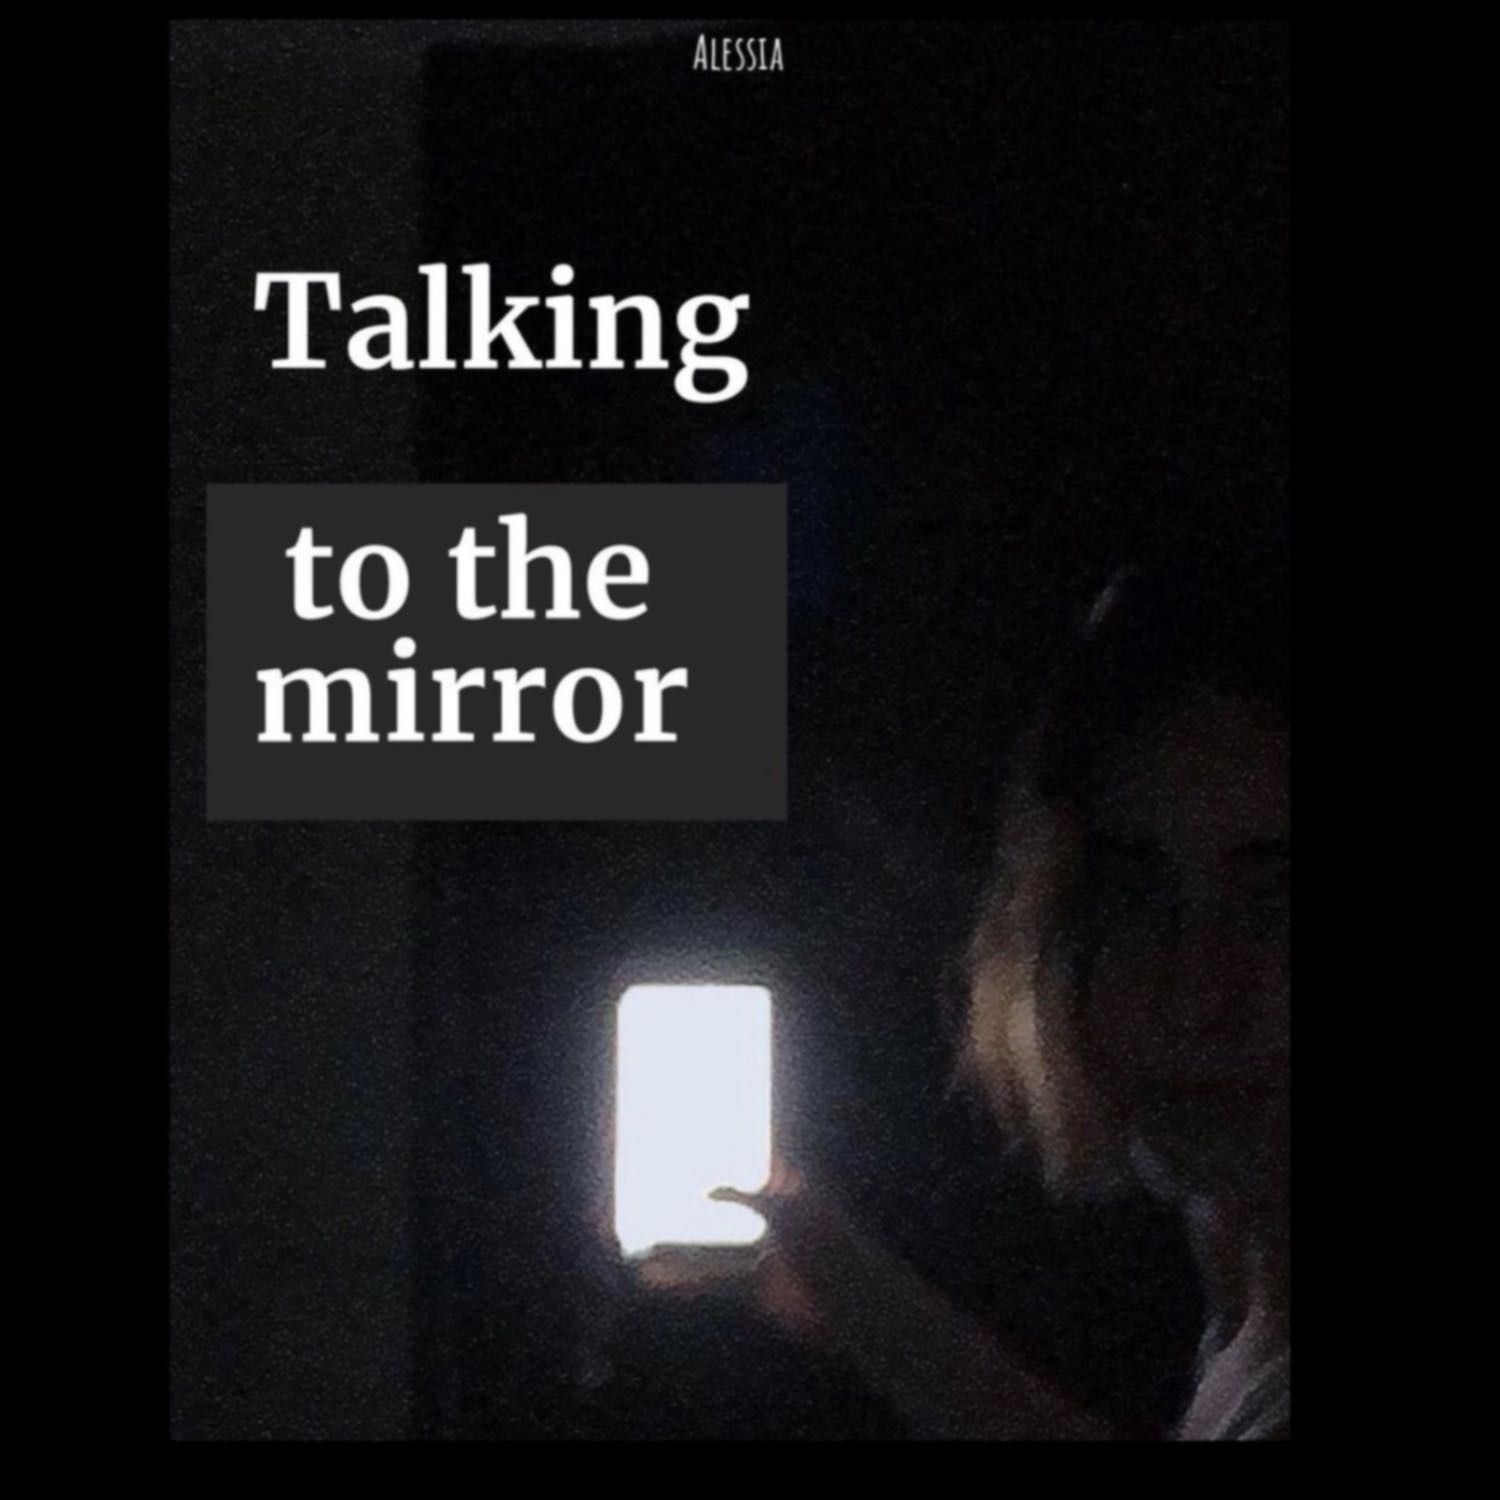 Talking to the mirror 